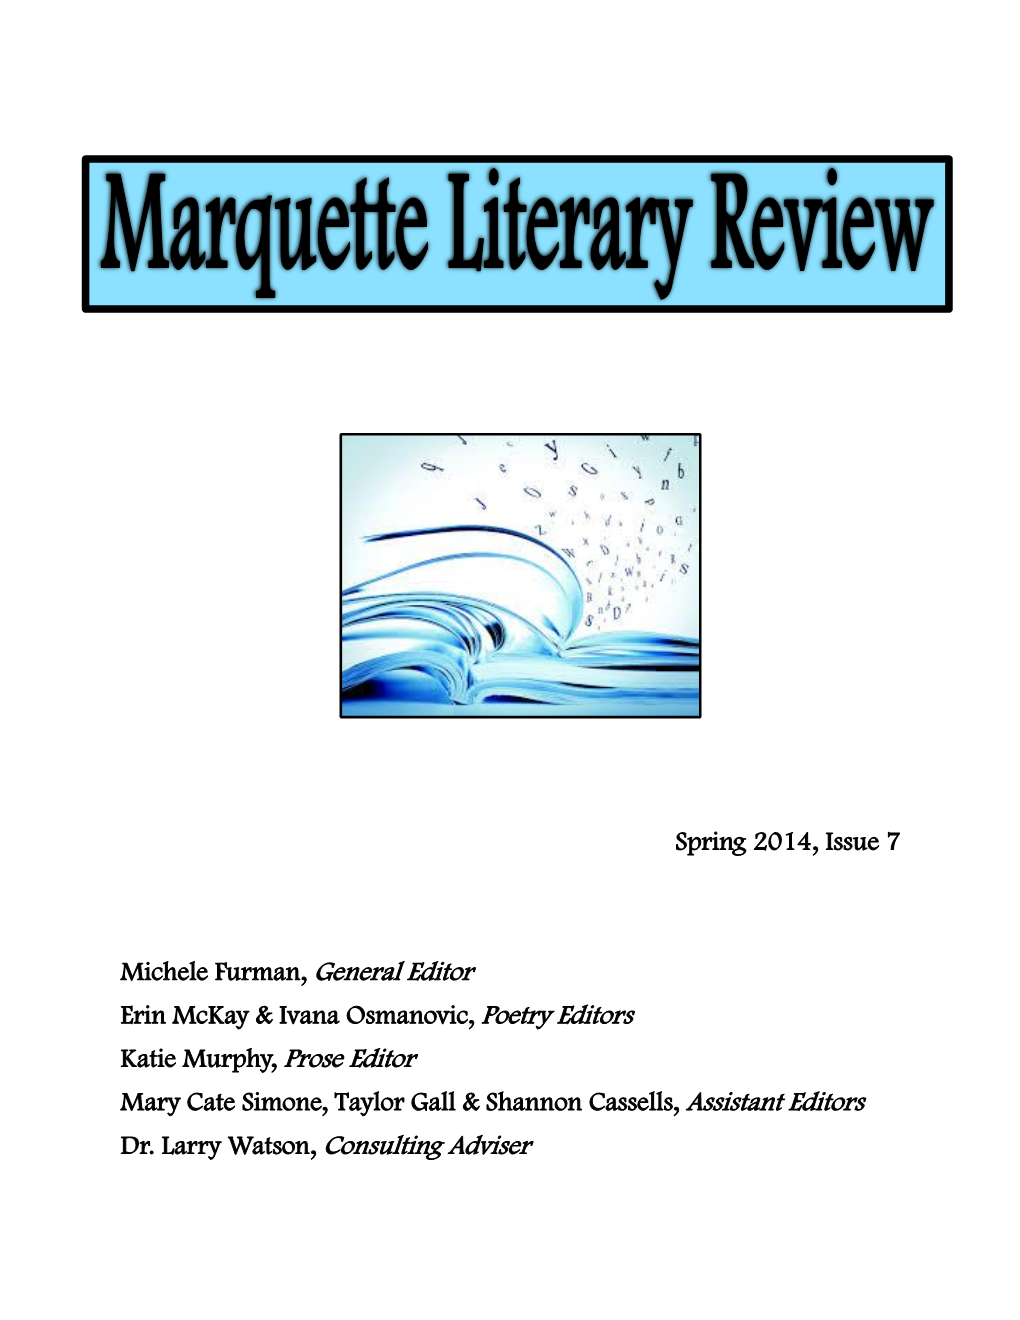 Marquette Literary Review, Issue 7, Spring 2014